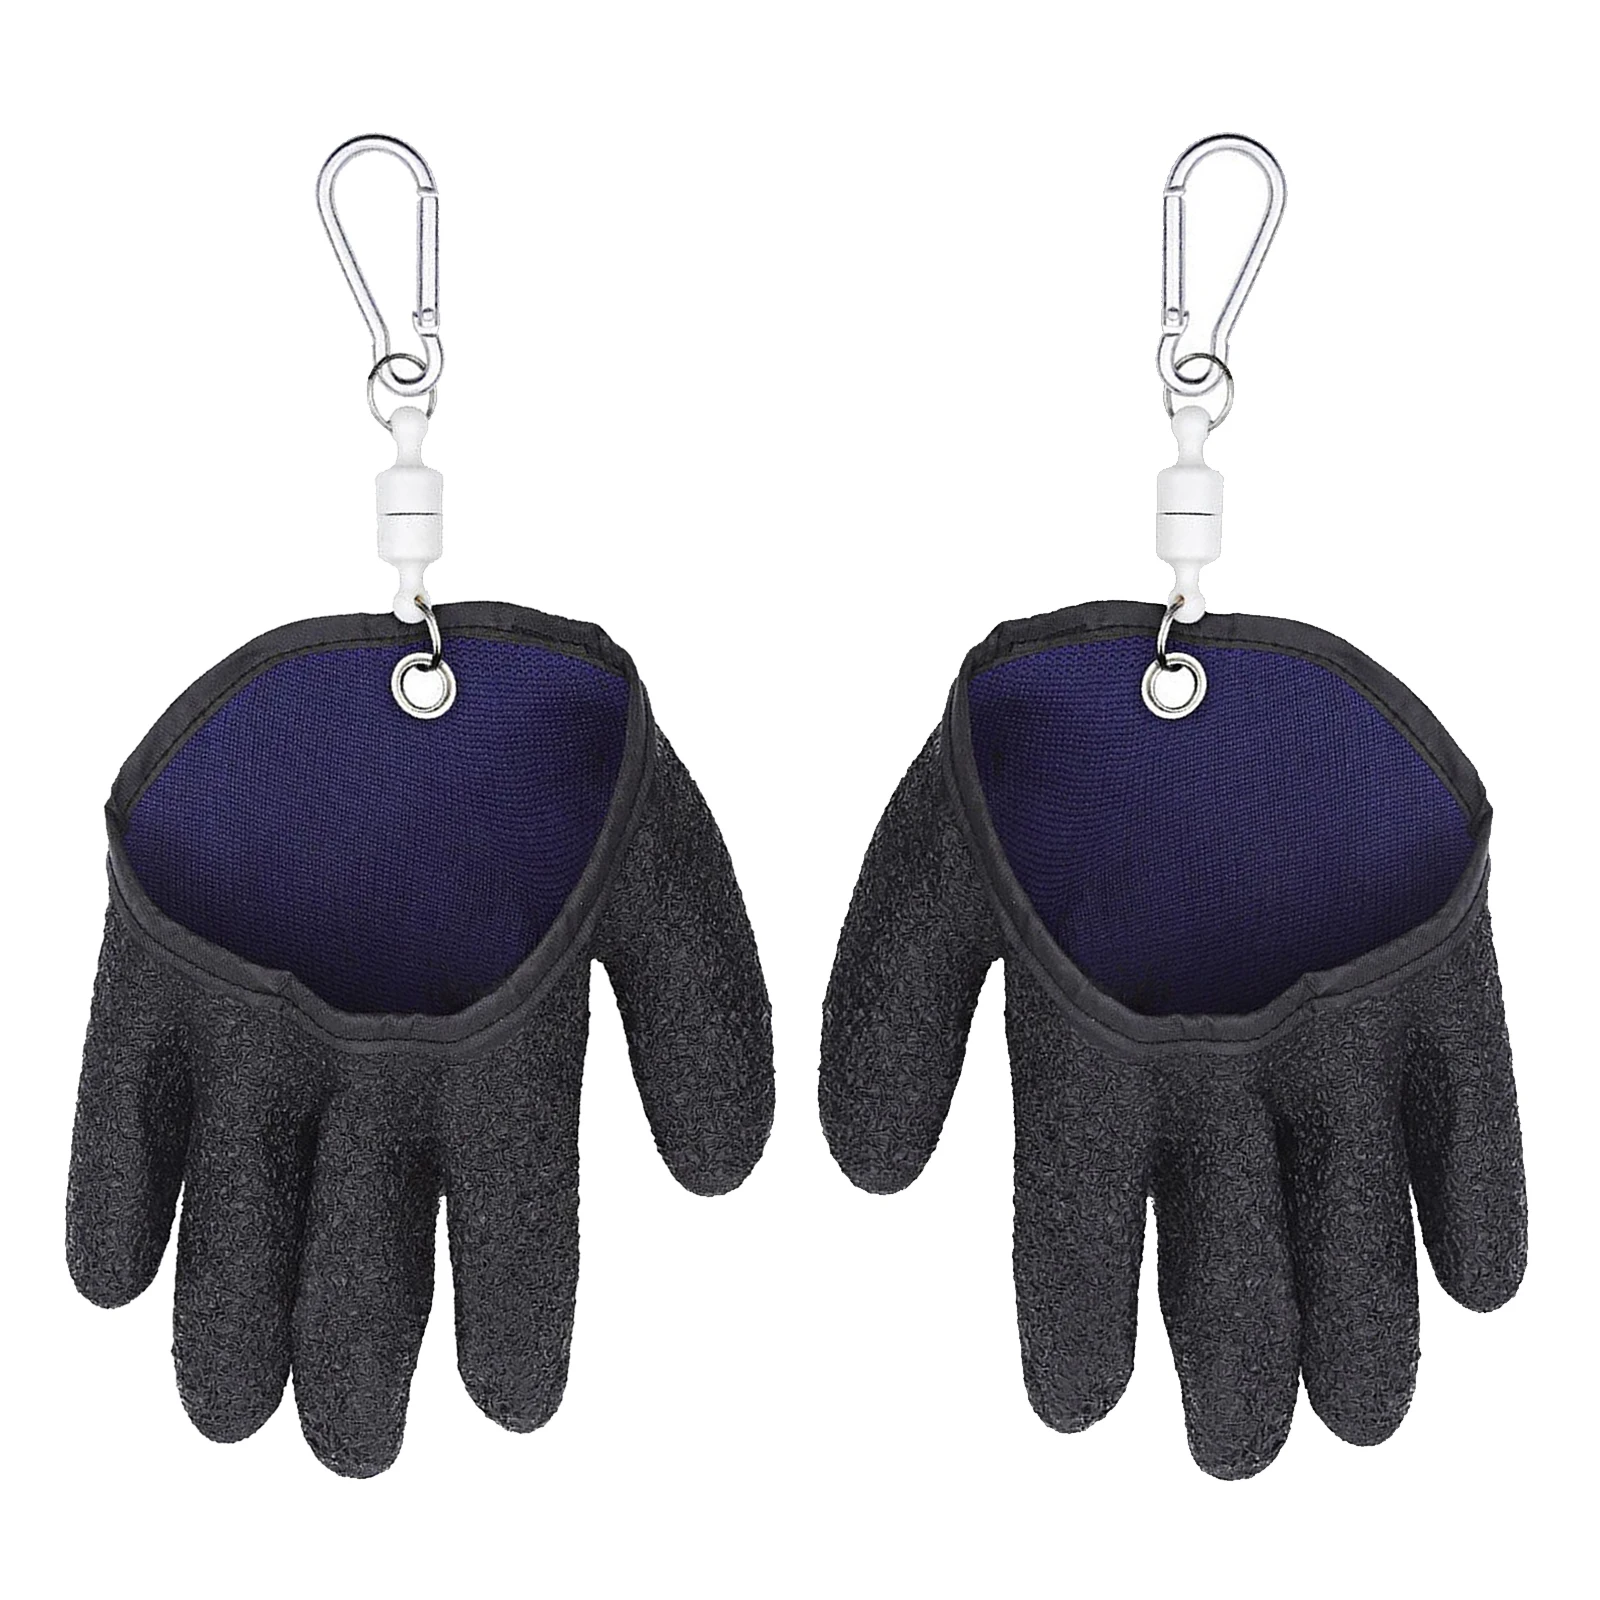 Fisherman Professional Left/ Right Hand Fishing Glove, with Magnet Hooks Release for Winter